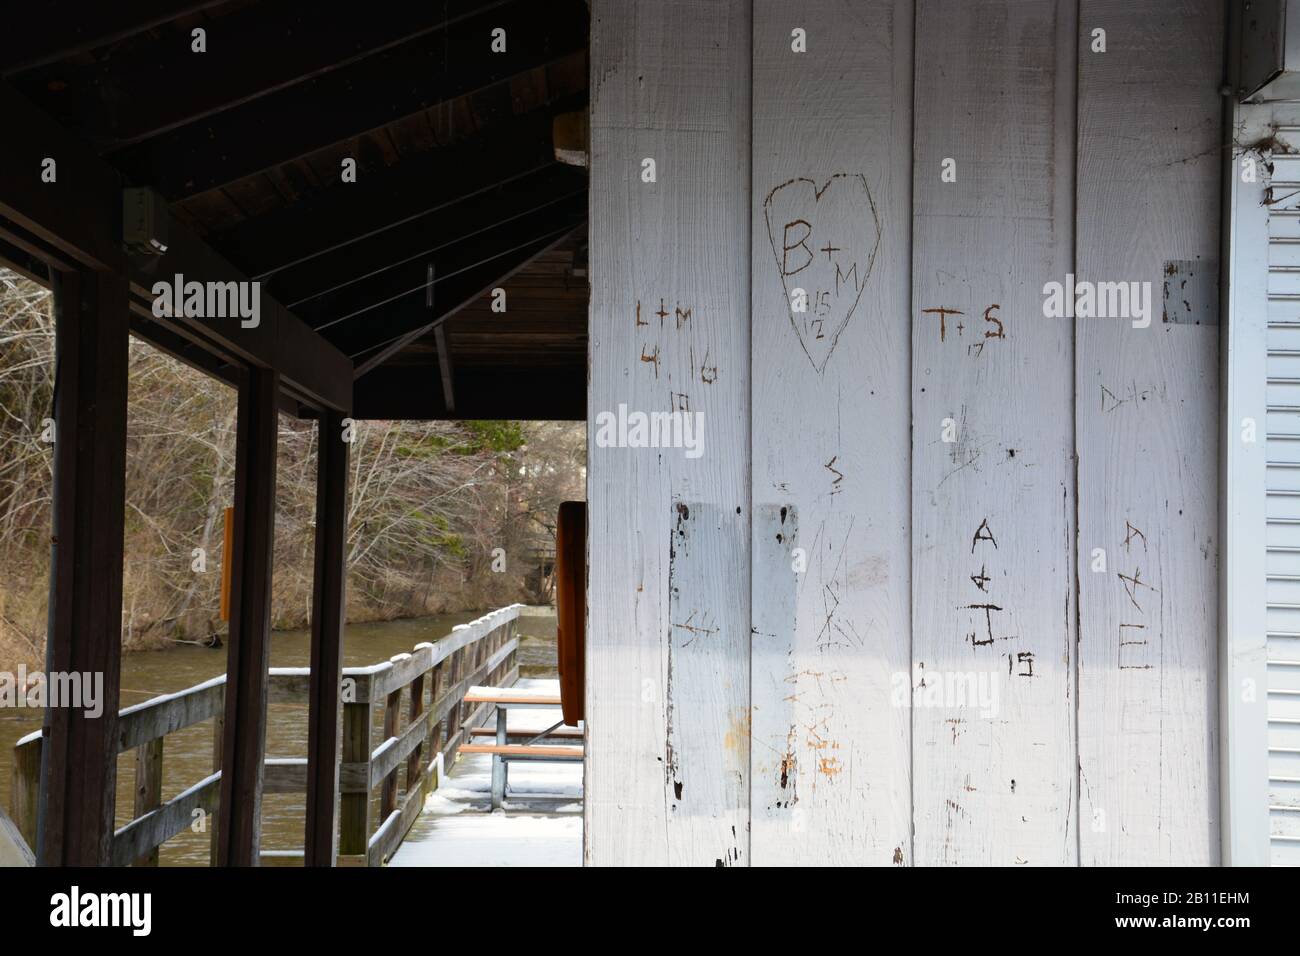 Graffiti is carved into the walls on the fishing dock at Shelley Lake Park in Raleigh North Carolina. Stock Photo